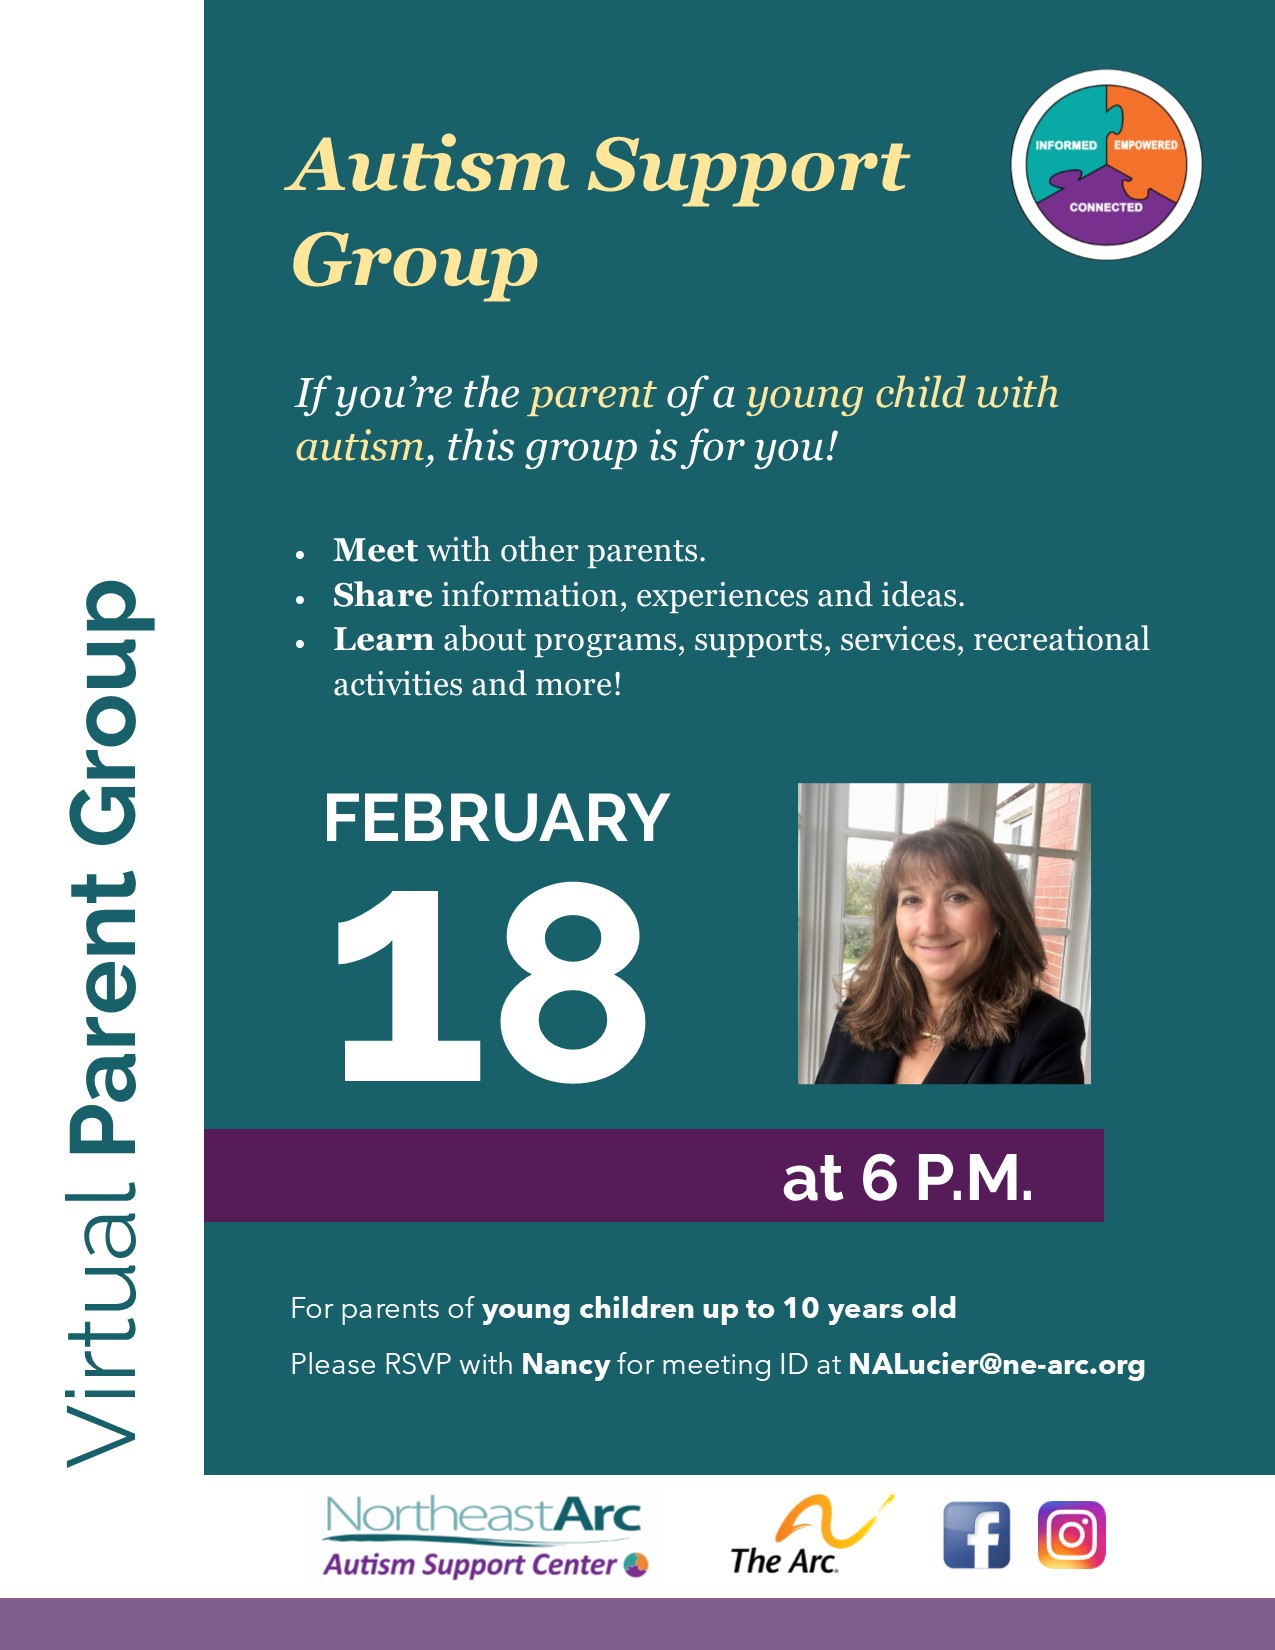 Flyer for Autism Support Center Virtual Autism Support Group for Parents of Young Children with Autism on February 18 at 6PM. RSVP Nancy at NALucier@ne-arc.org for zoom meeting link.